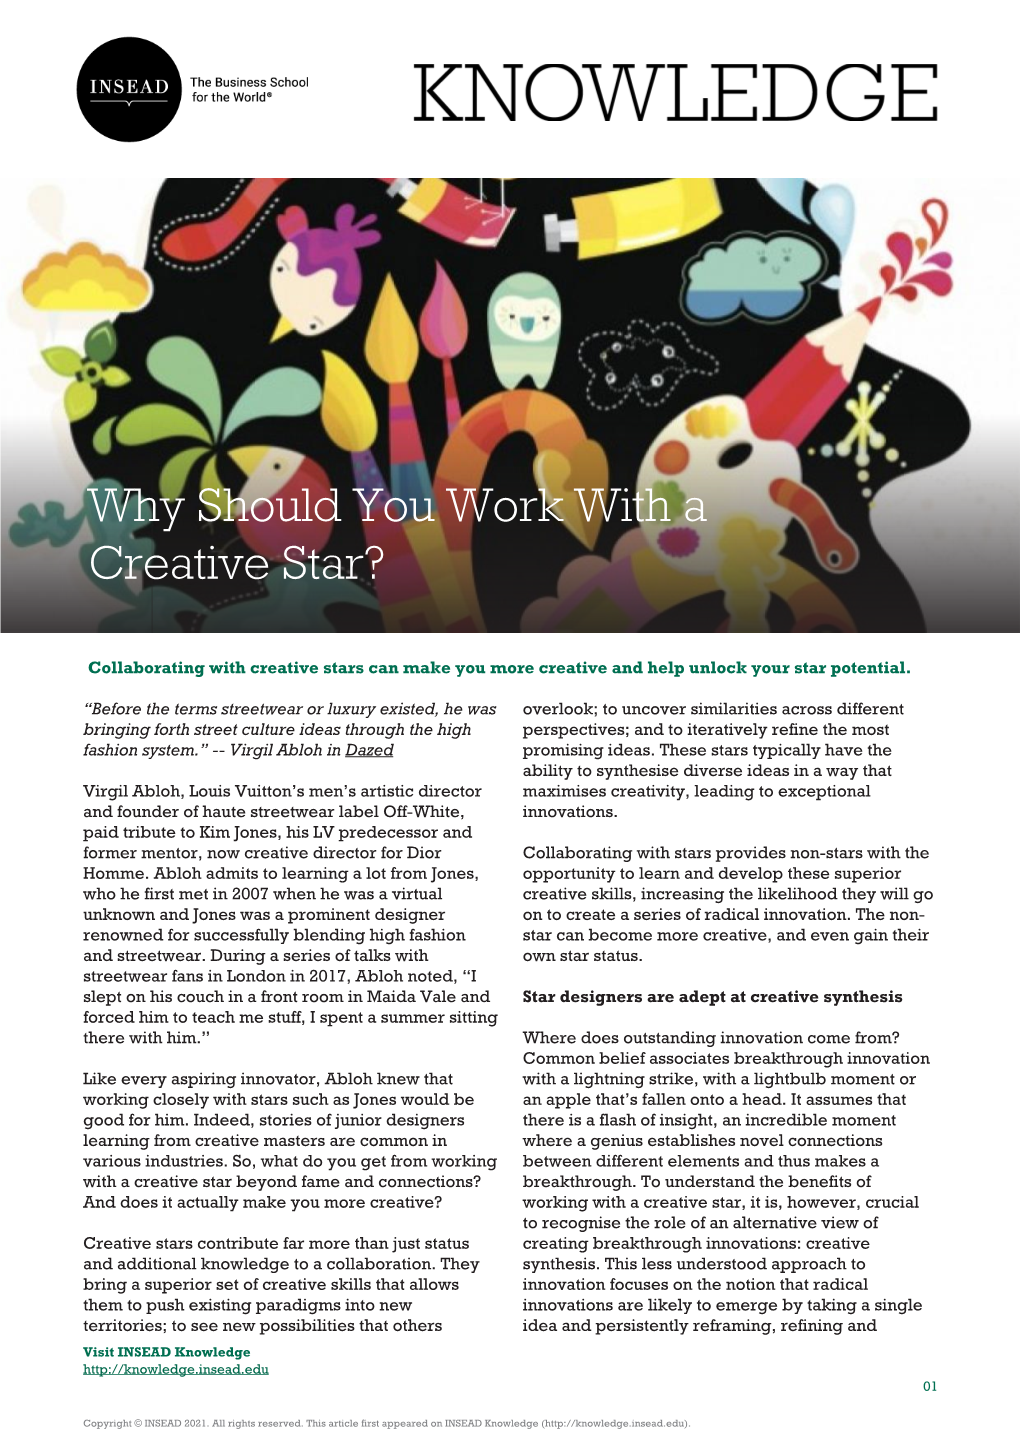 Why Should You Work with a Creative Star?